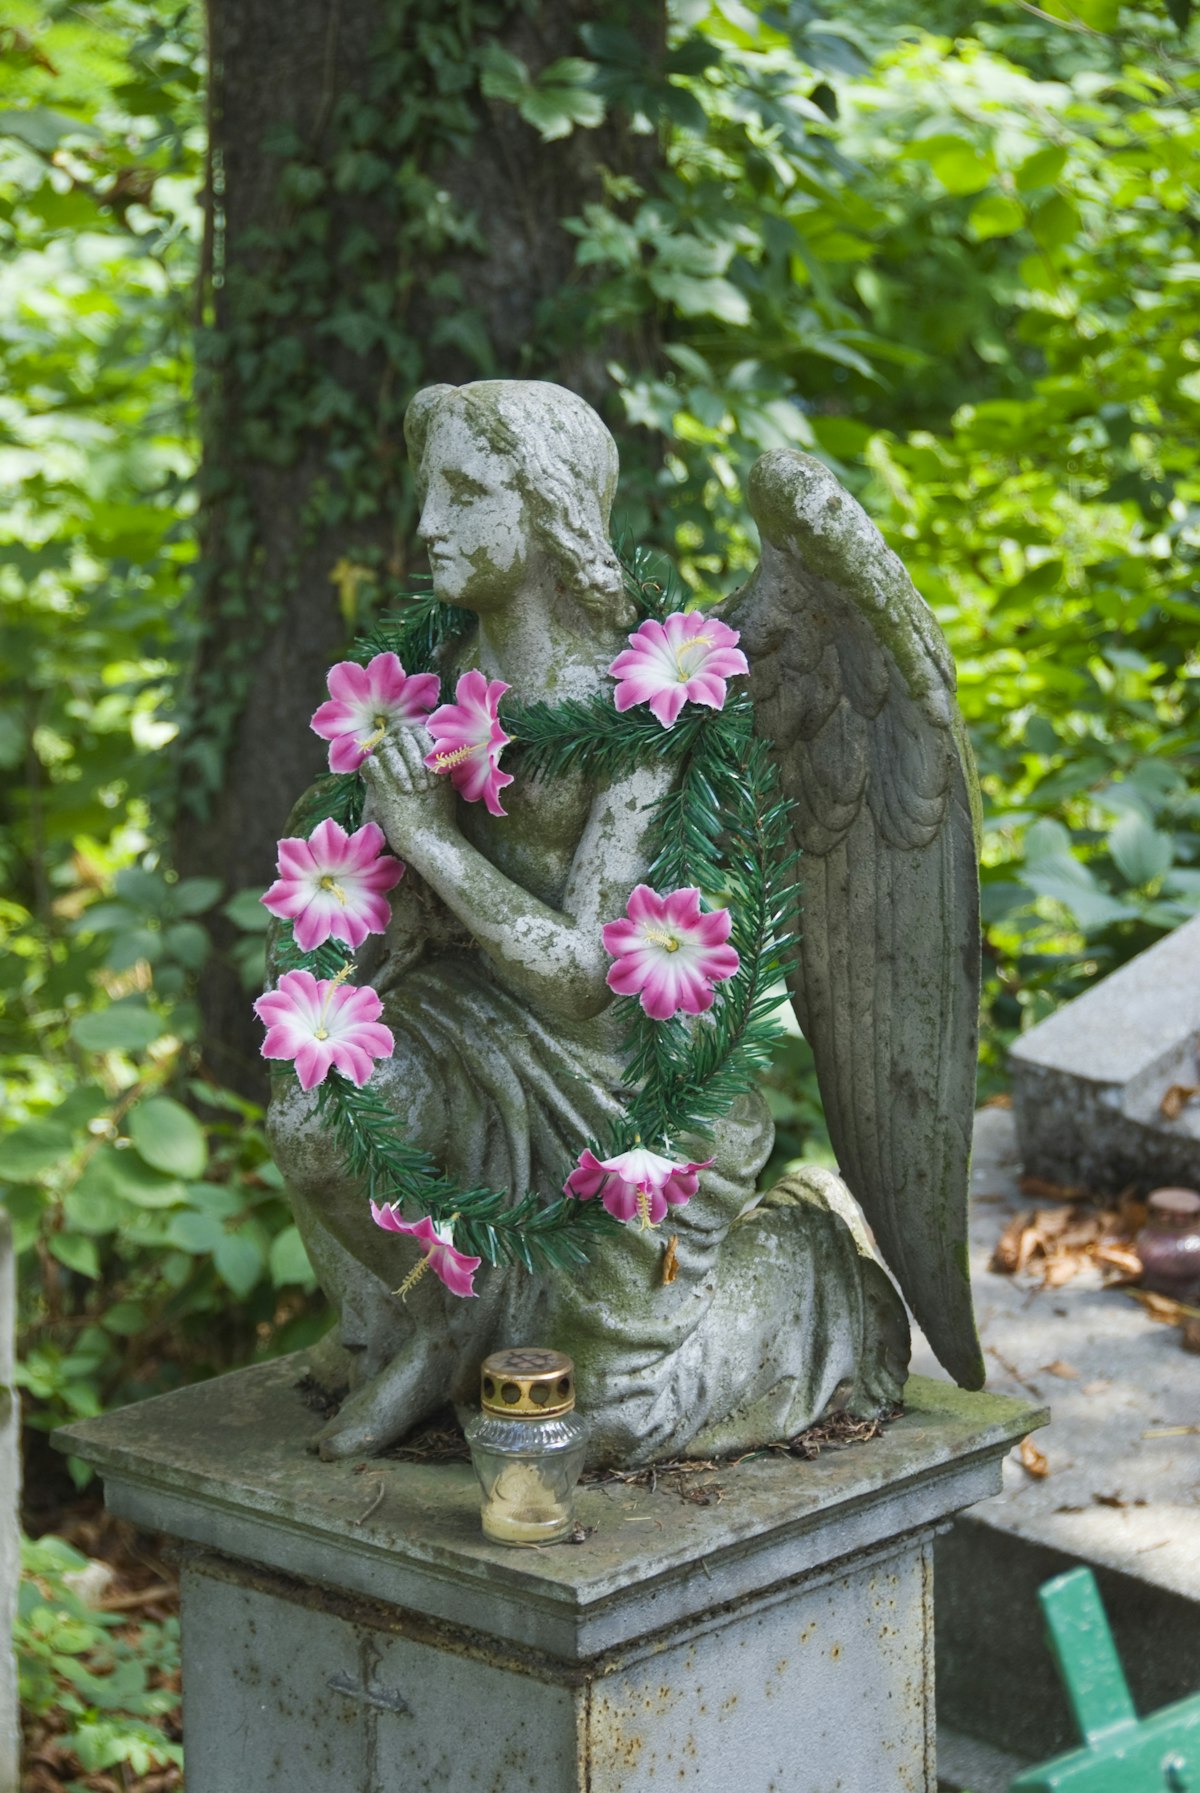 Artifical flowers decorating small winged angel statue on grave at Lychakivske Cemetery.